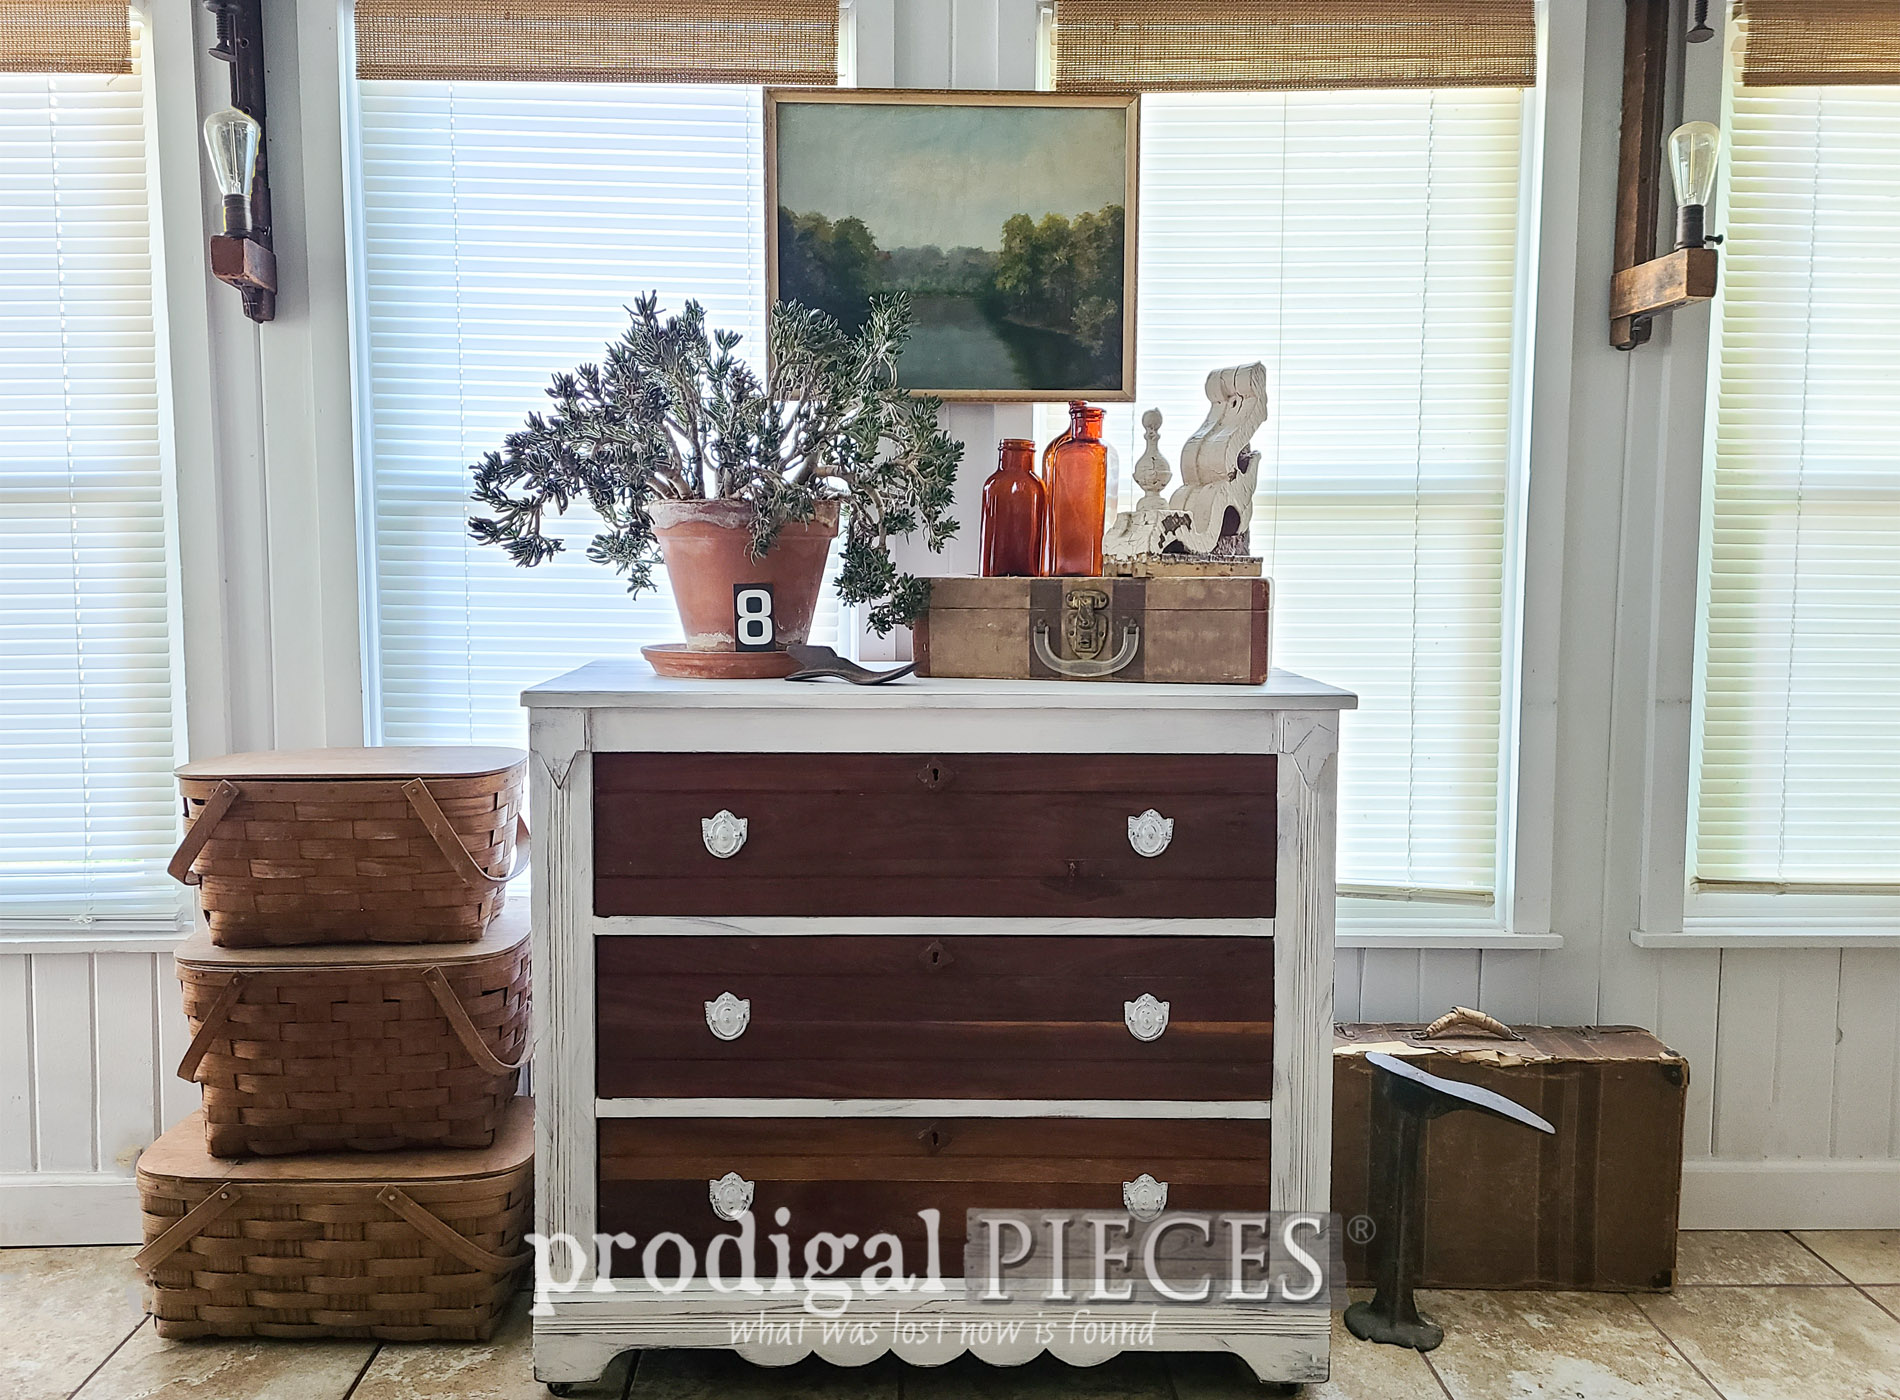 Featured Damaged Chest of Drawers Made New by Larissa of Prodigal Pieces | prodigalpieces.com #prodigalpieces #farmhouse #furniture #home